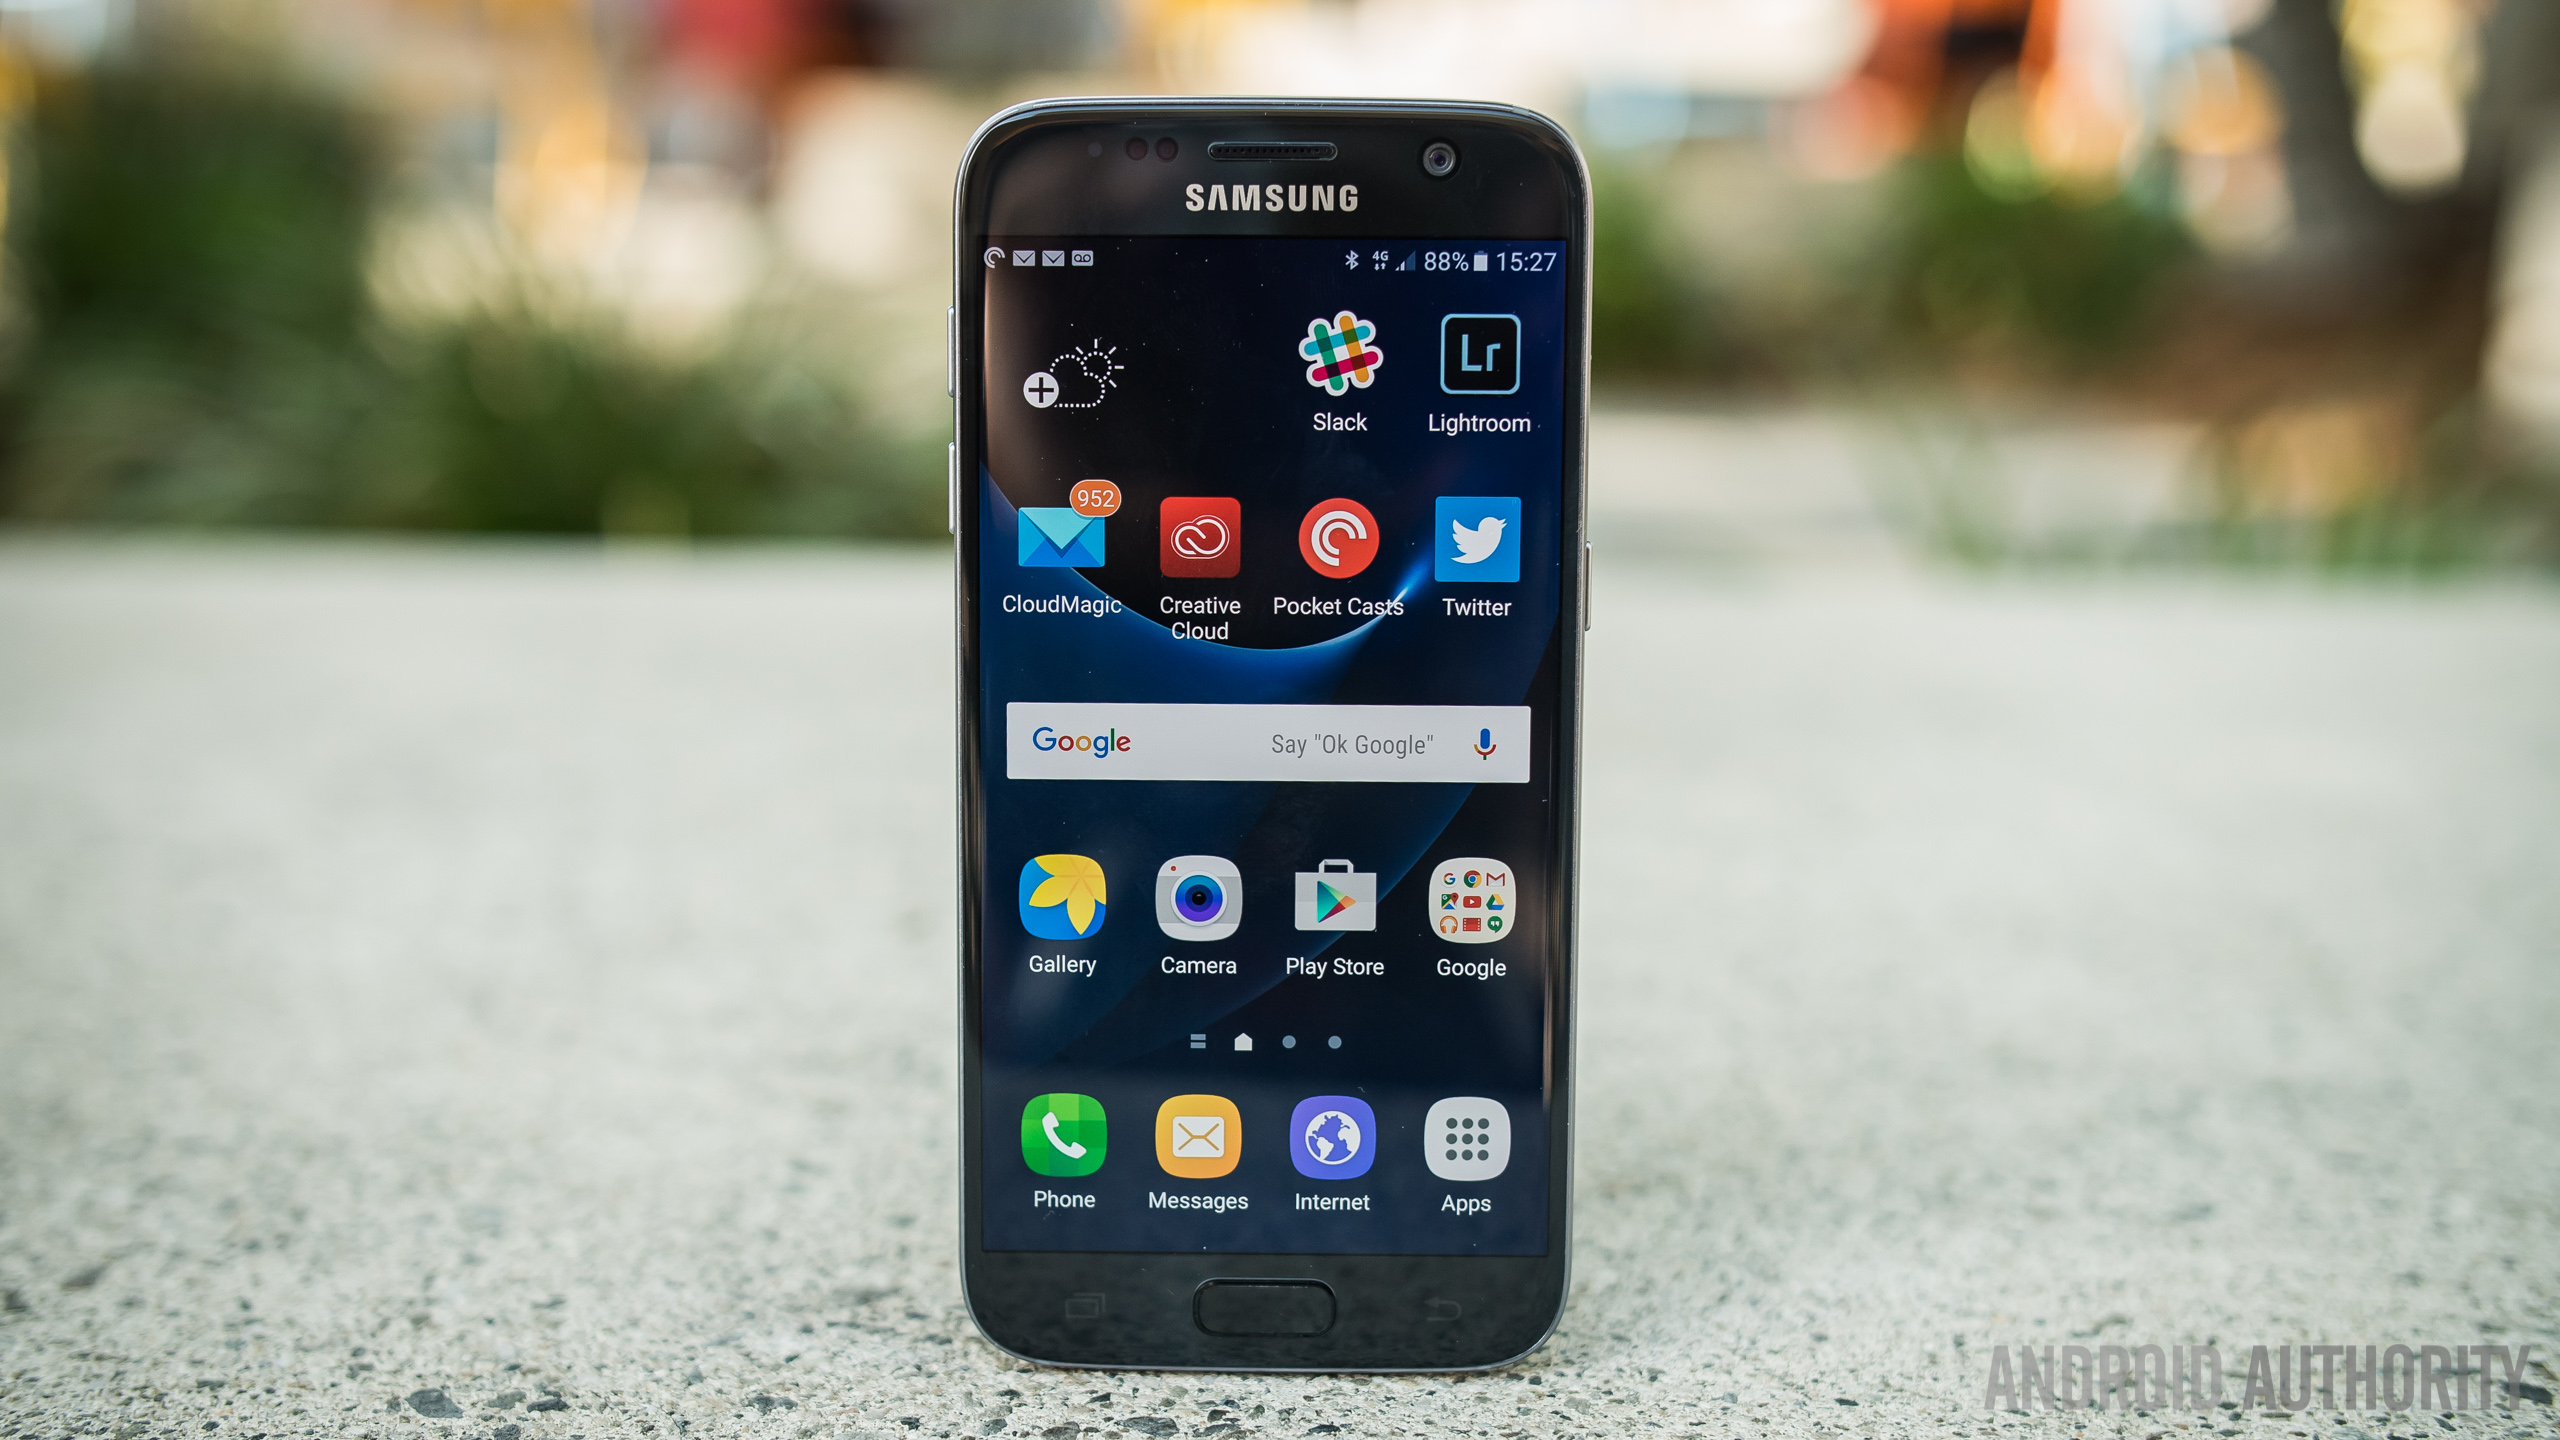 Imperial Diplomaat Pech Samsung Galaxy S7 review - Android Authority